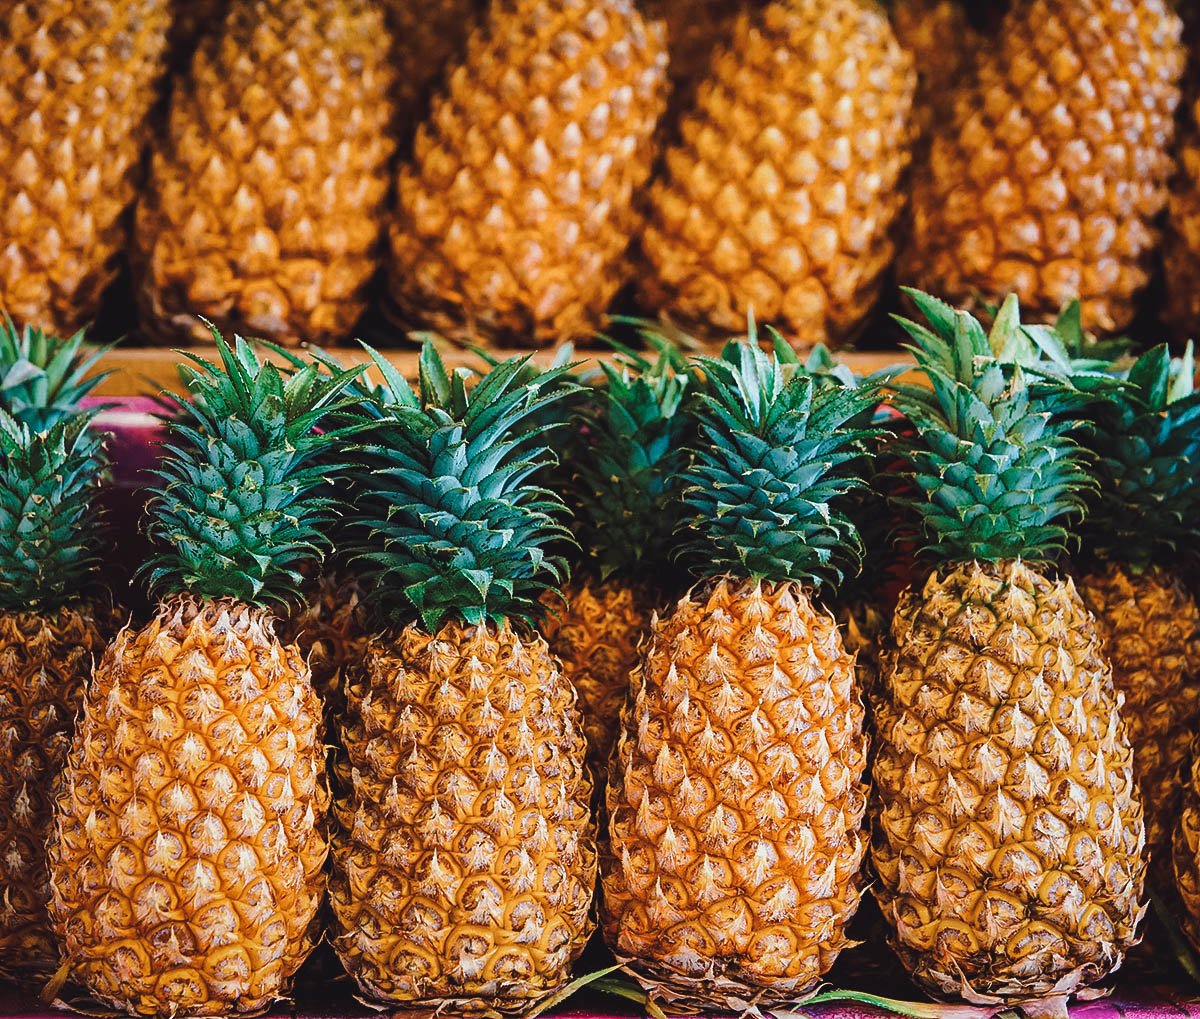 Stack of pineapples at a local market in the Philippines